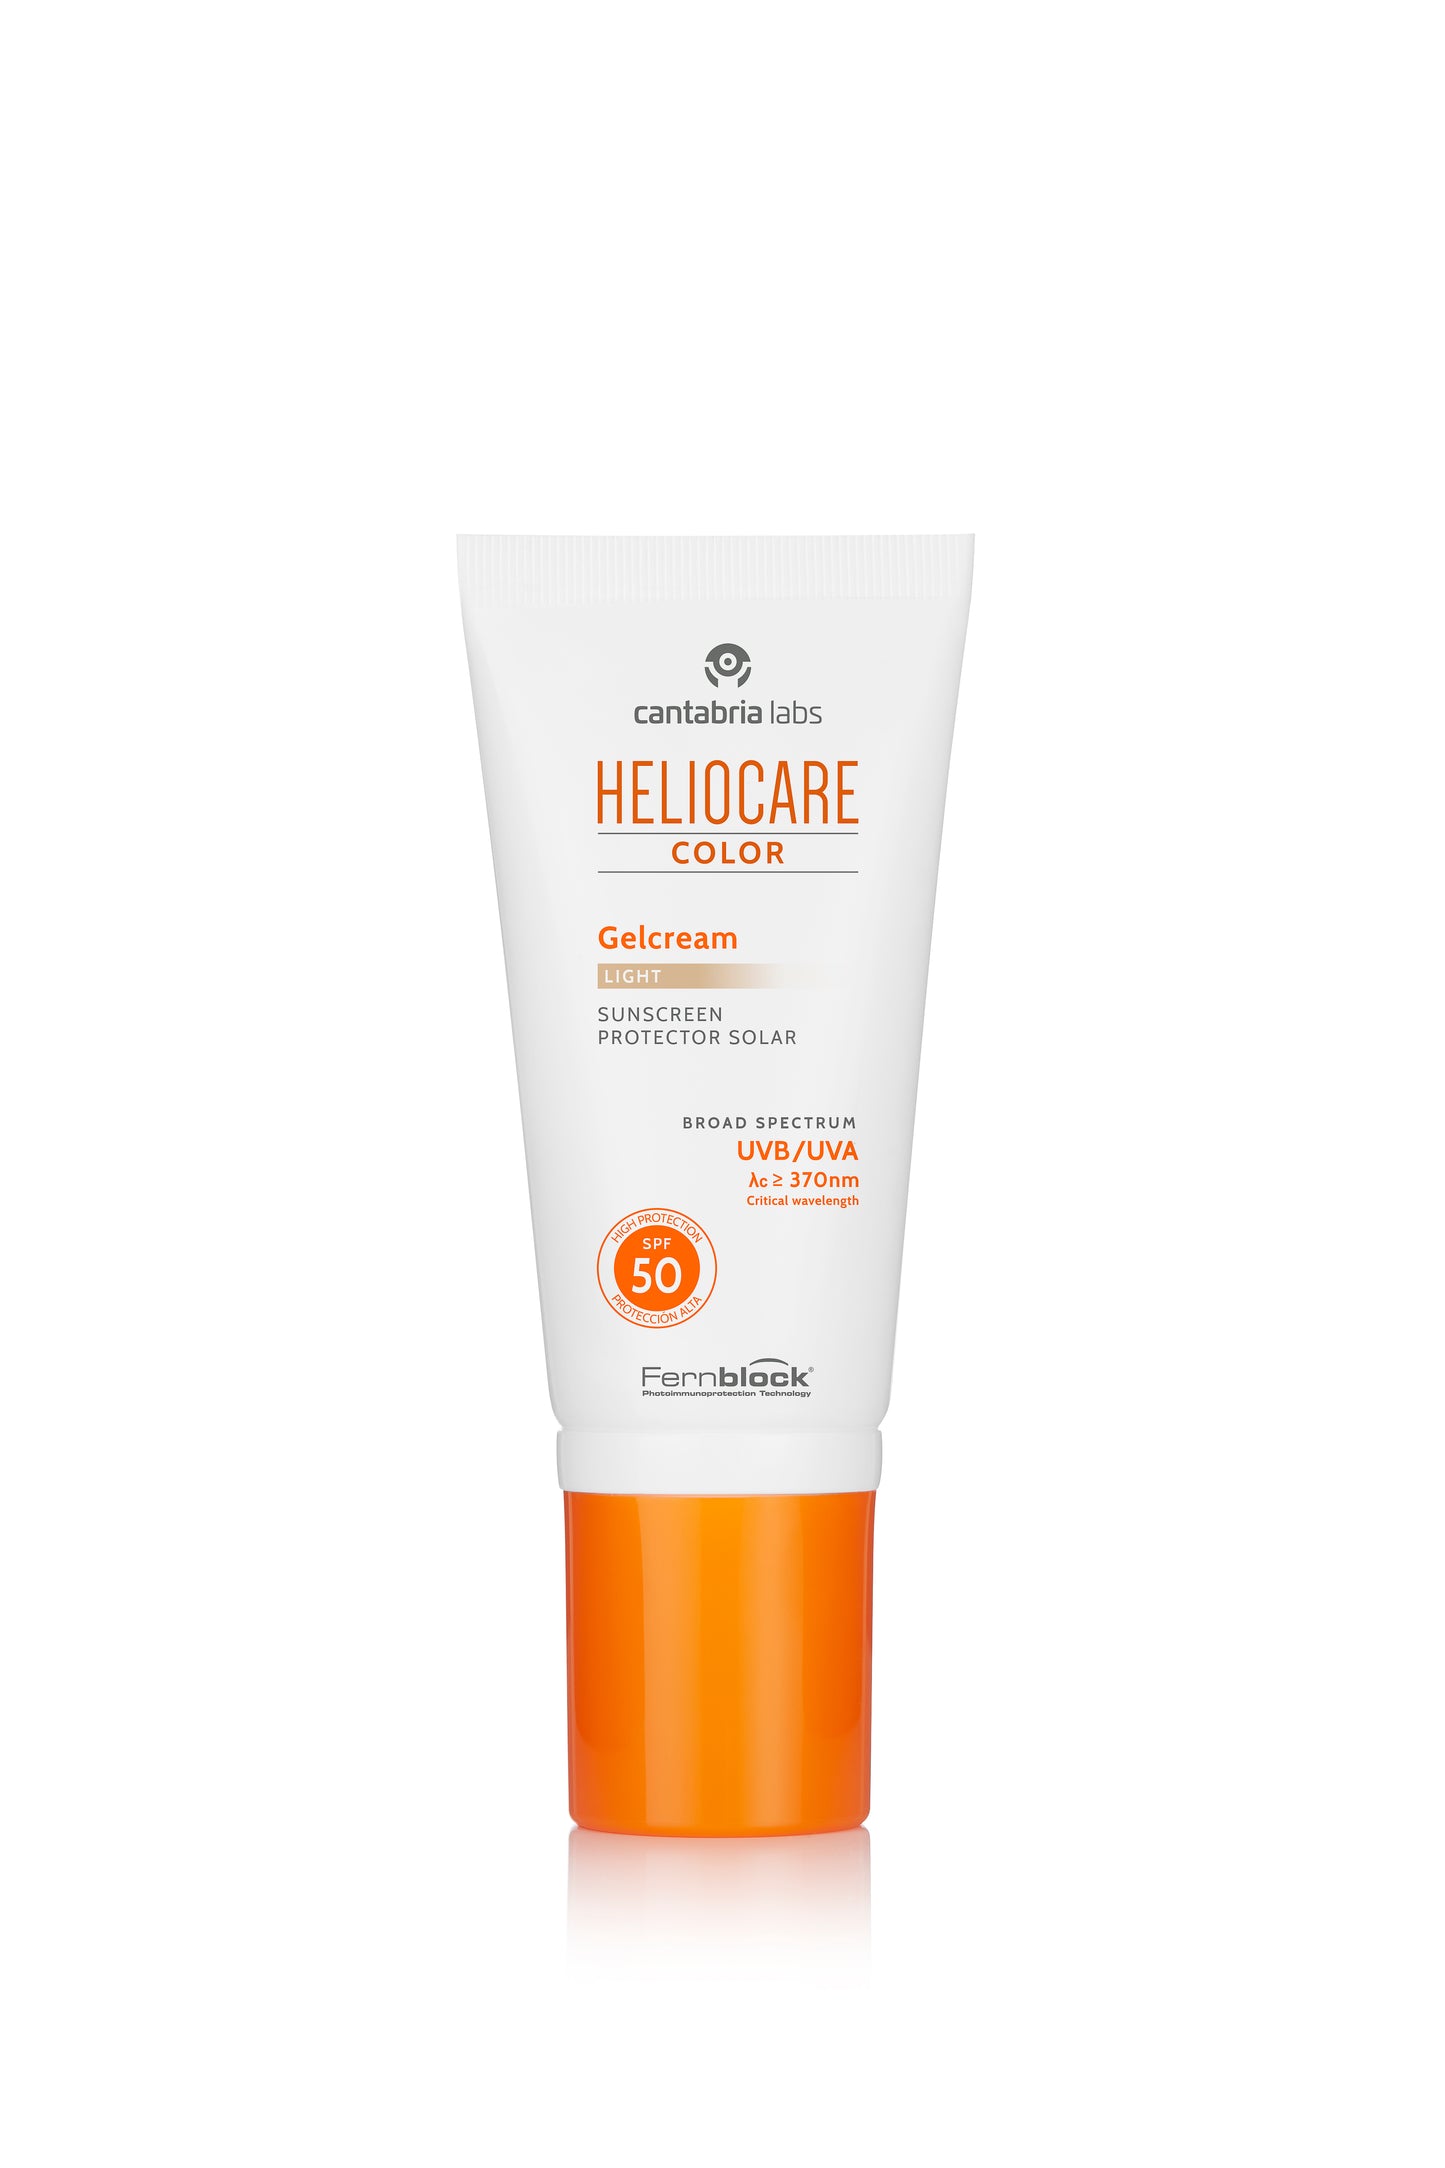 Heliocare Face - Farbige Gelcreme SPF 50 - LEICHT